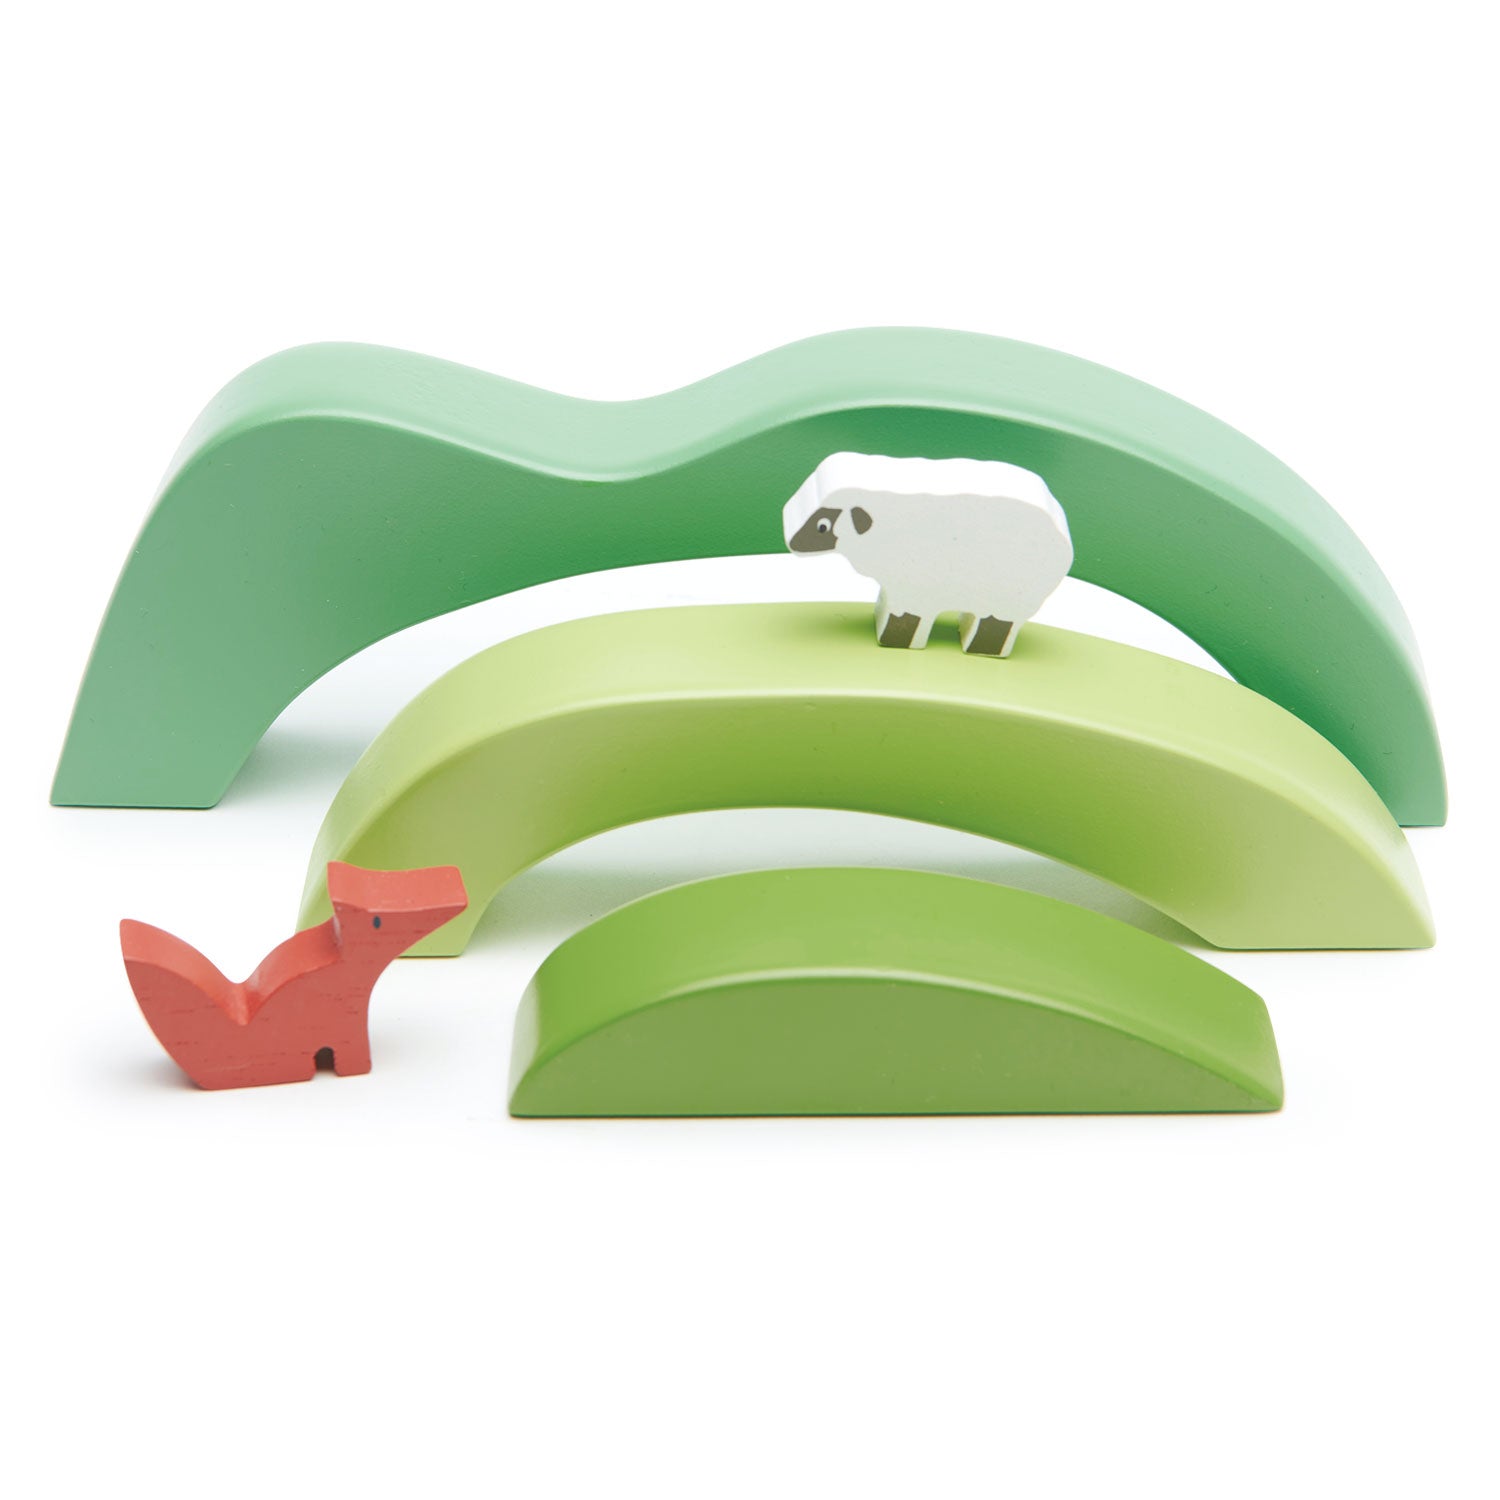 <p>Perfect for displaying your animals, three green solid wood hills that can be used as part of open-ended play. Included are a fox and a sheep.</p>
<p>Age range: 3 Years And Older  </p>
<p>Product size: 9.37 x 3.54 x 3.03&quot;  </p>
<p> Weight: 0.68 lbs</p>
